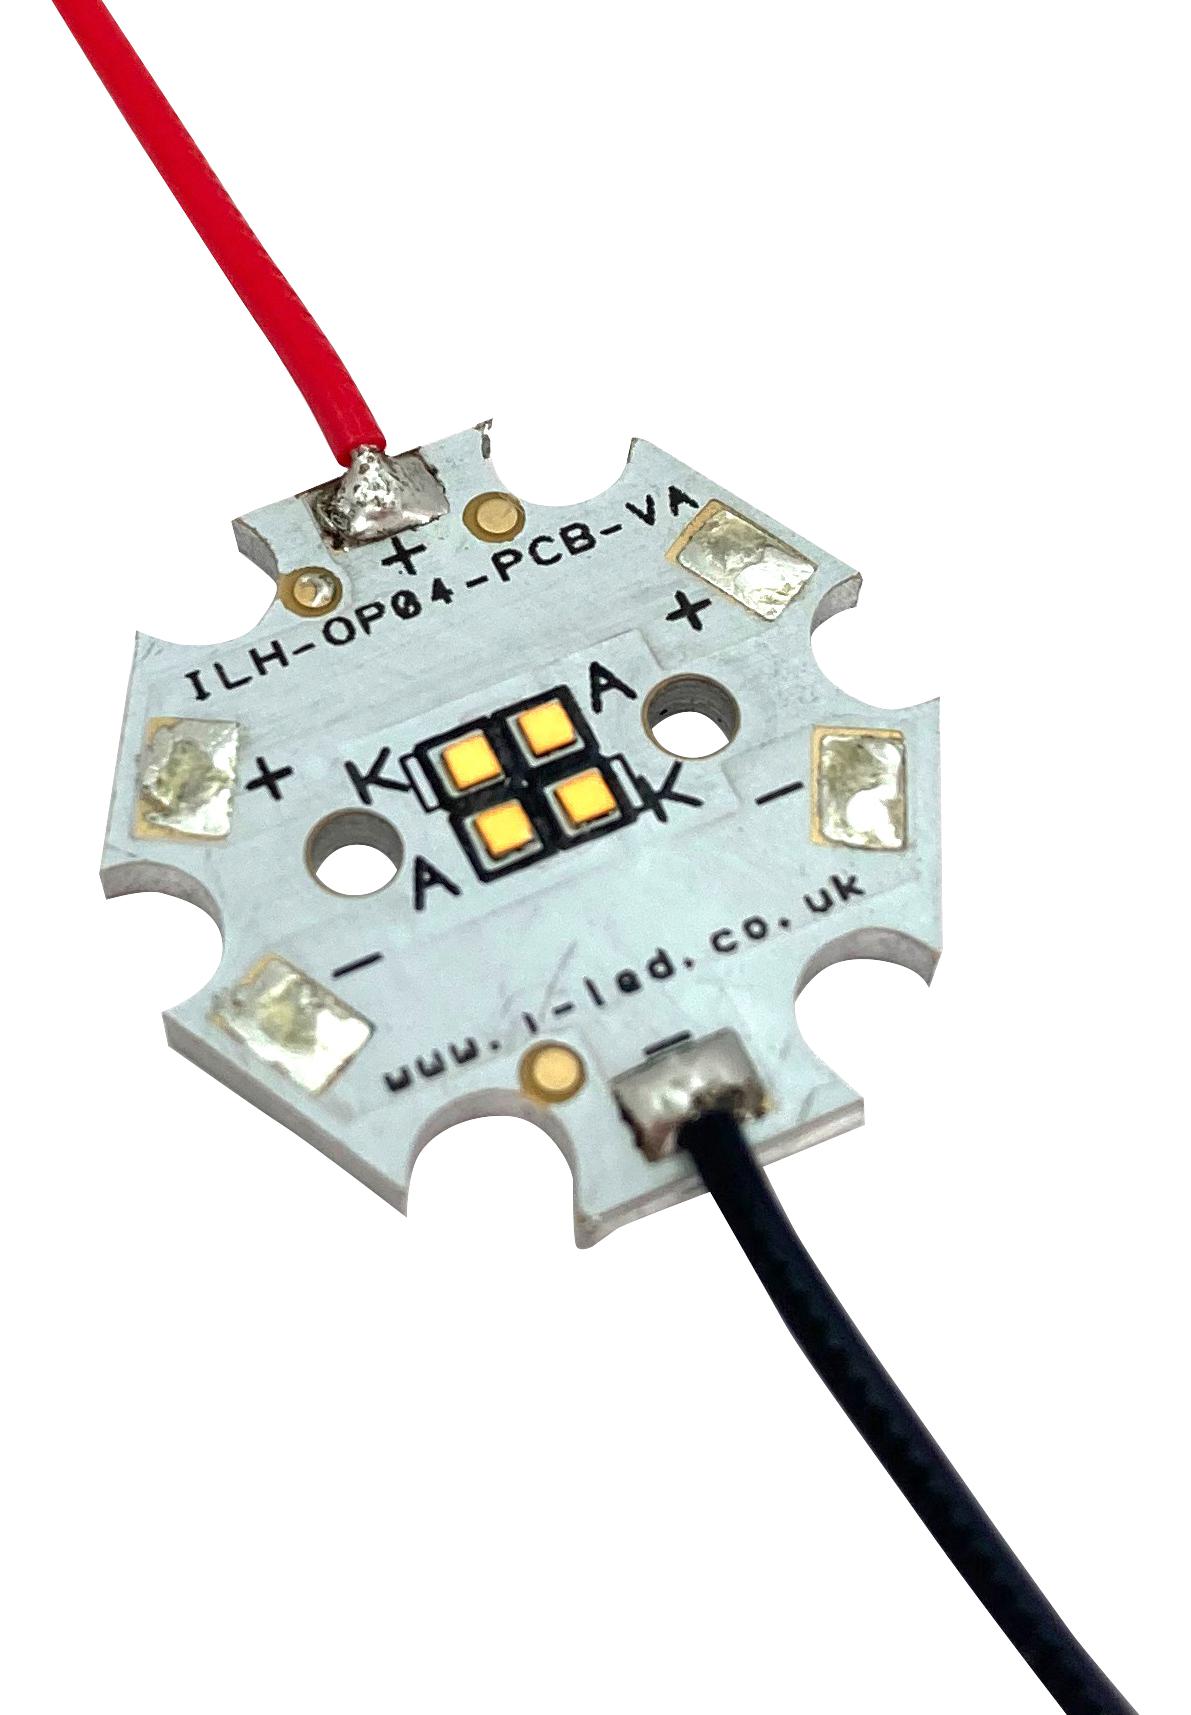 Intelligent Led Solutions Ilh-Op04-Trgr-Sc221-Wir200. Led Module, Green, 856Lm, 525Nm, Star